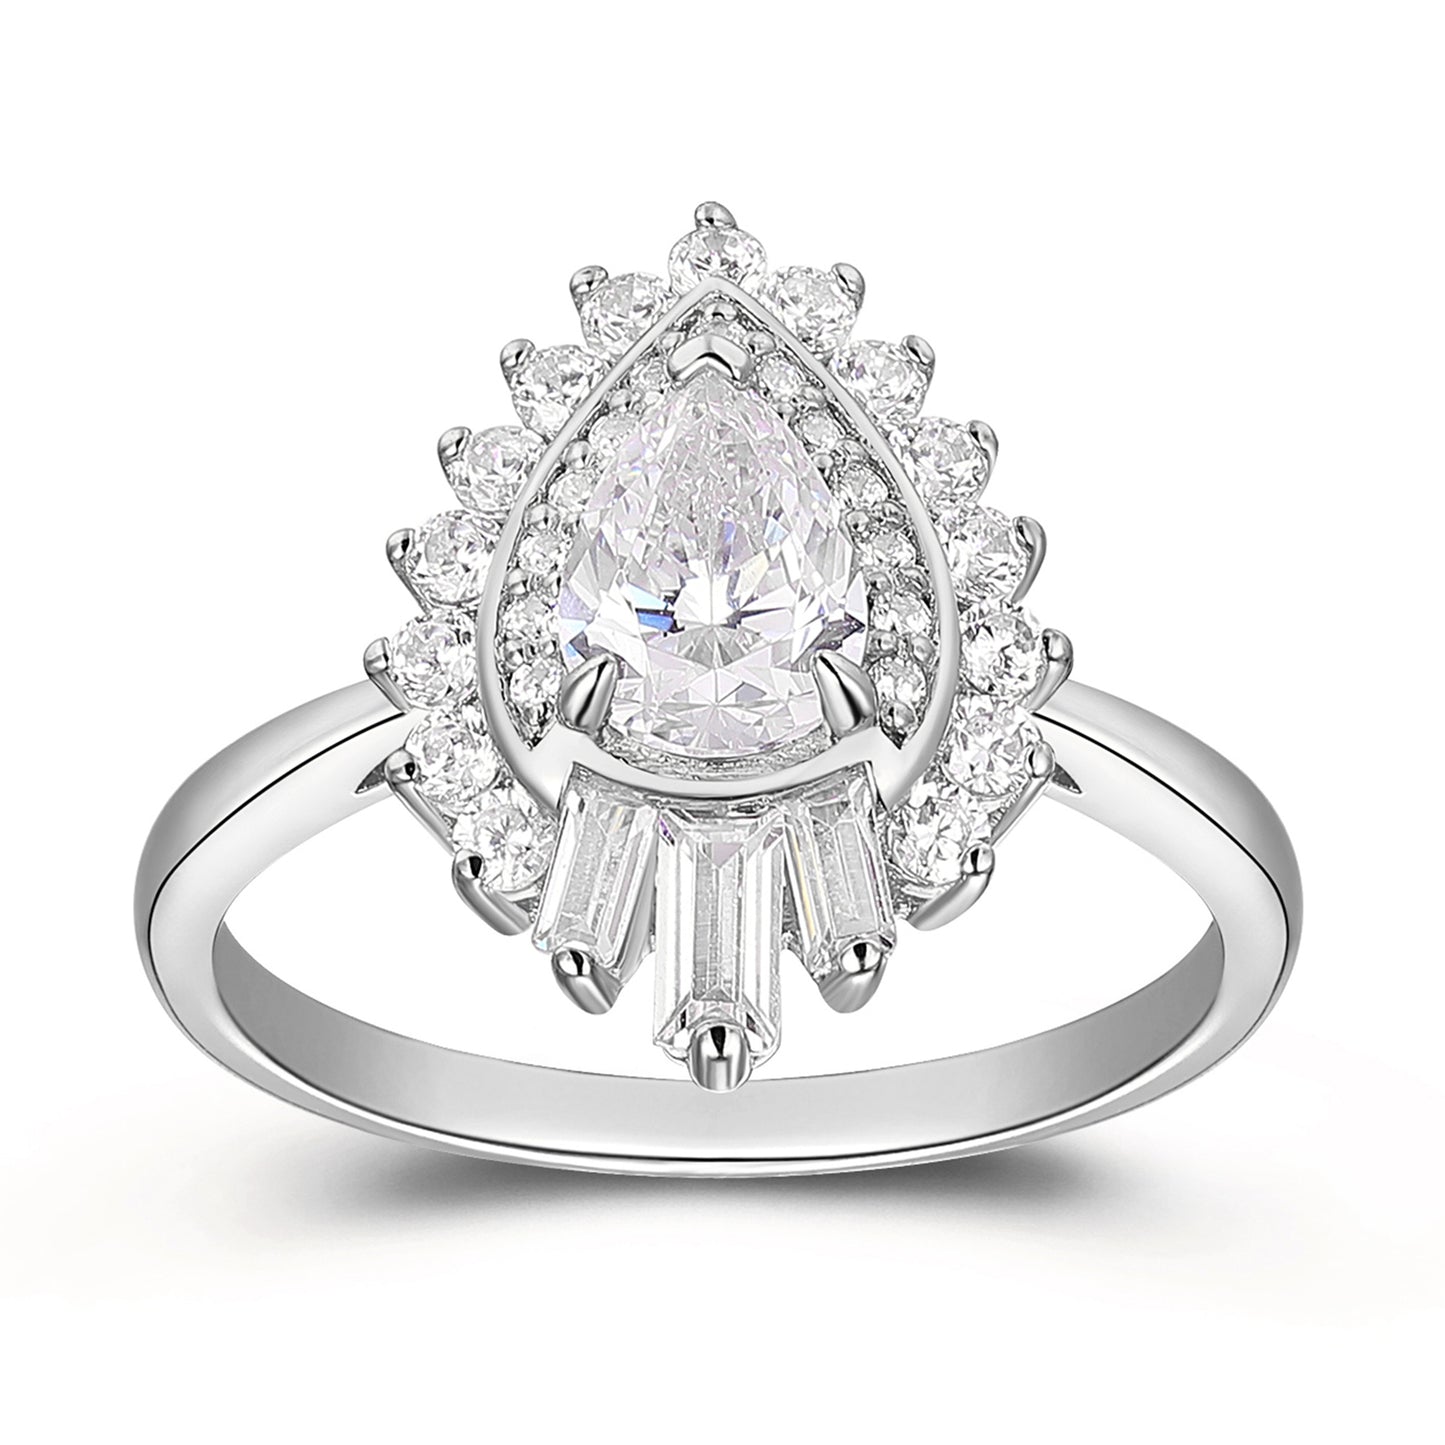 0.80 Carat Pear Cut Moissanite Classic Halo Engagement Ring In 925 Sterling Silver